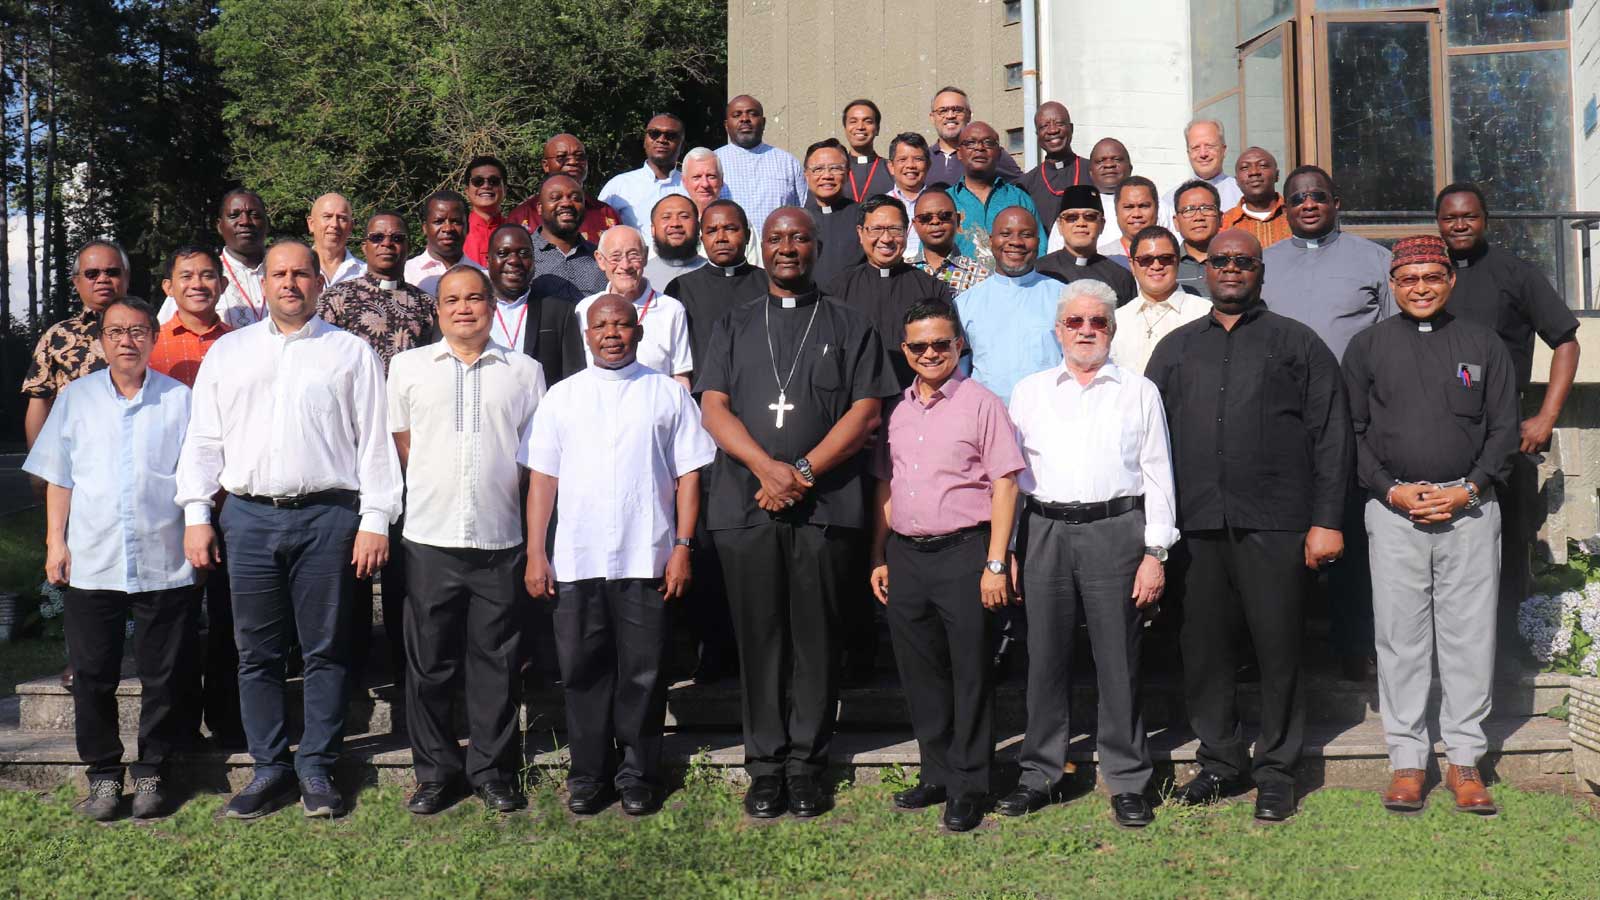 The participants in the 16th CICM General Chapter